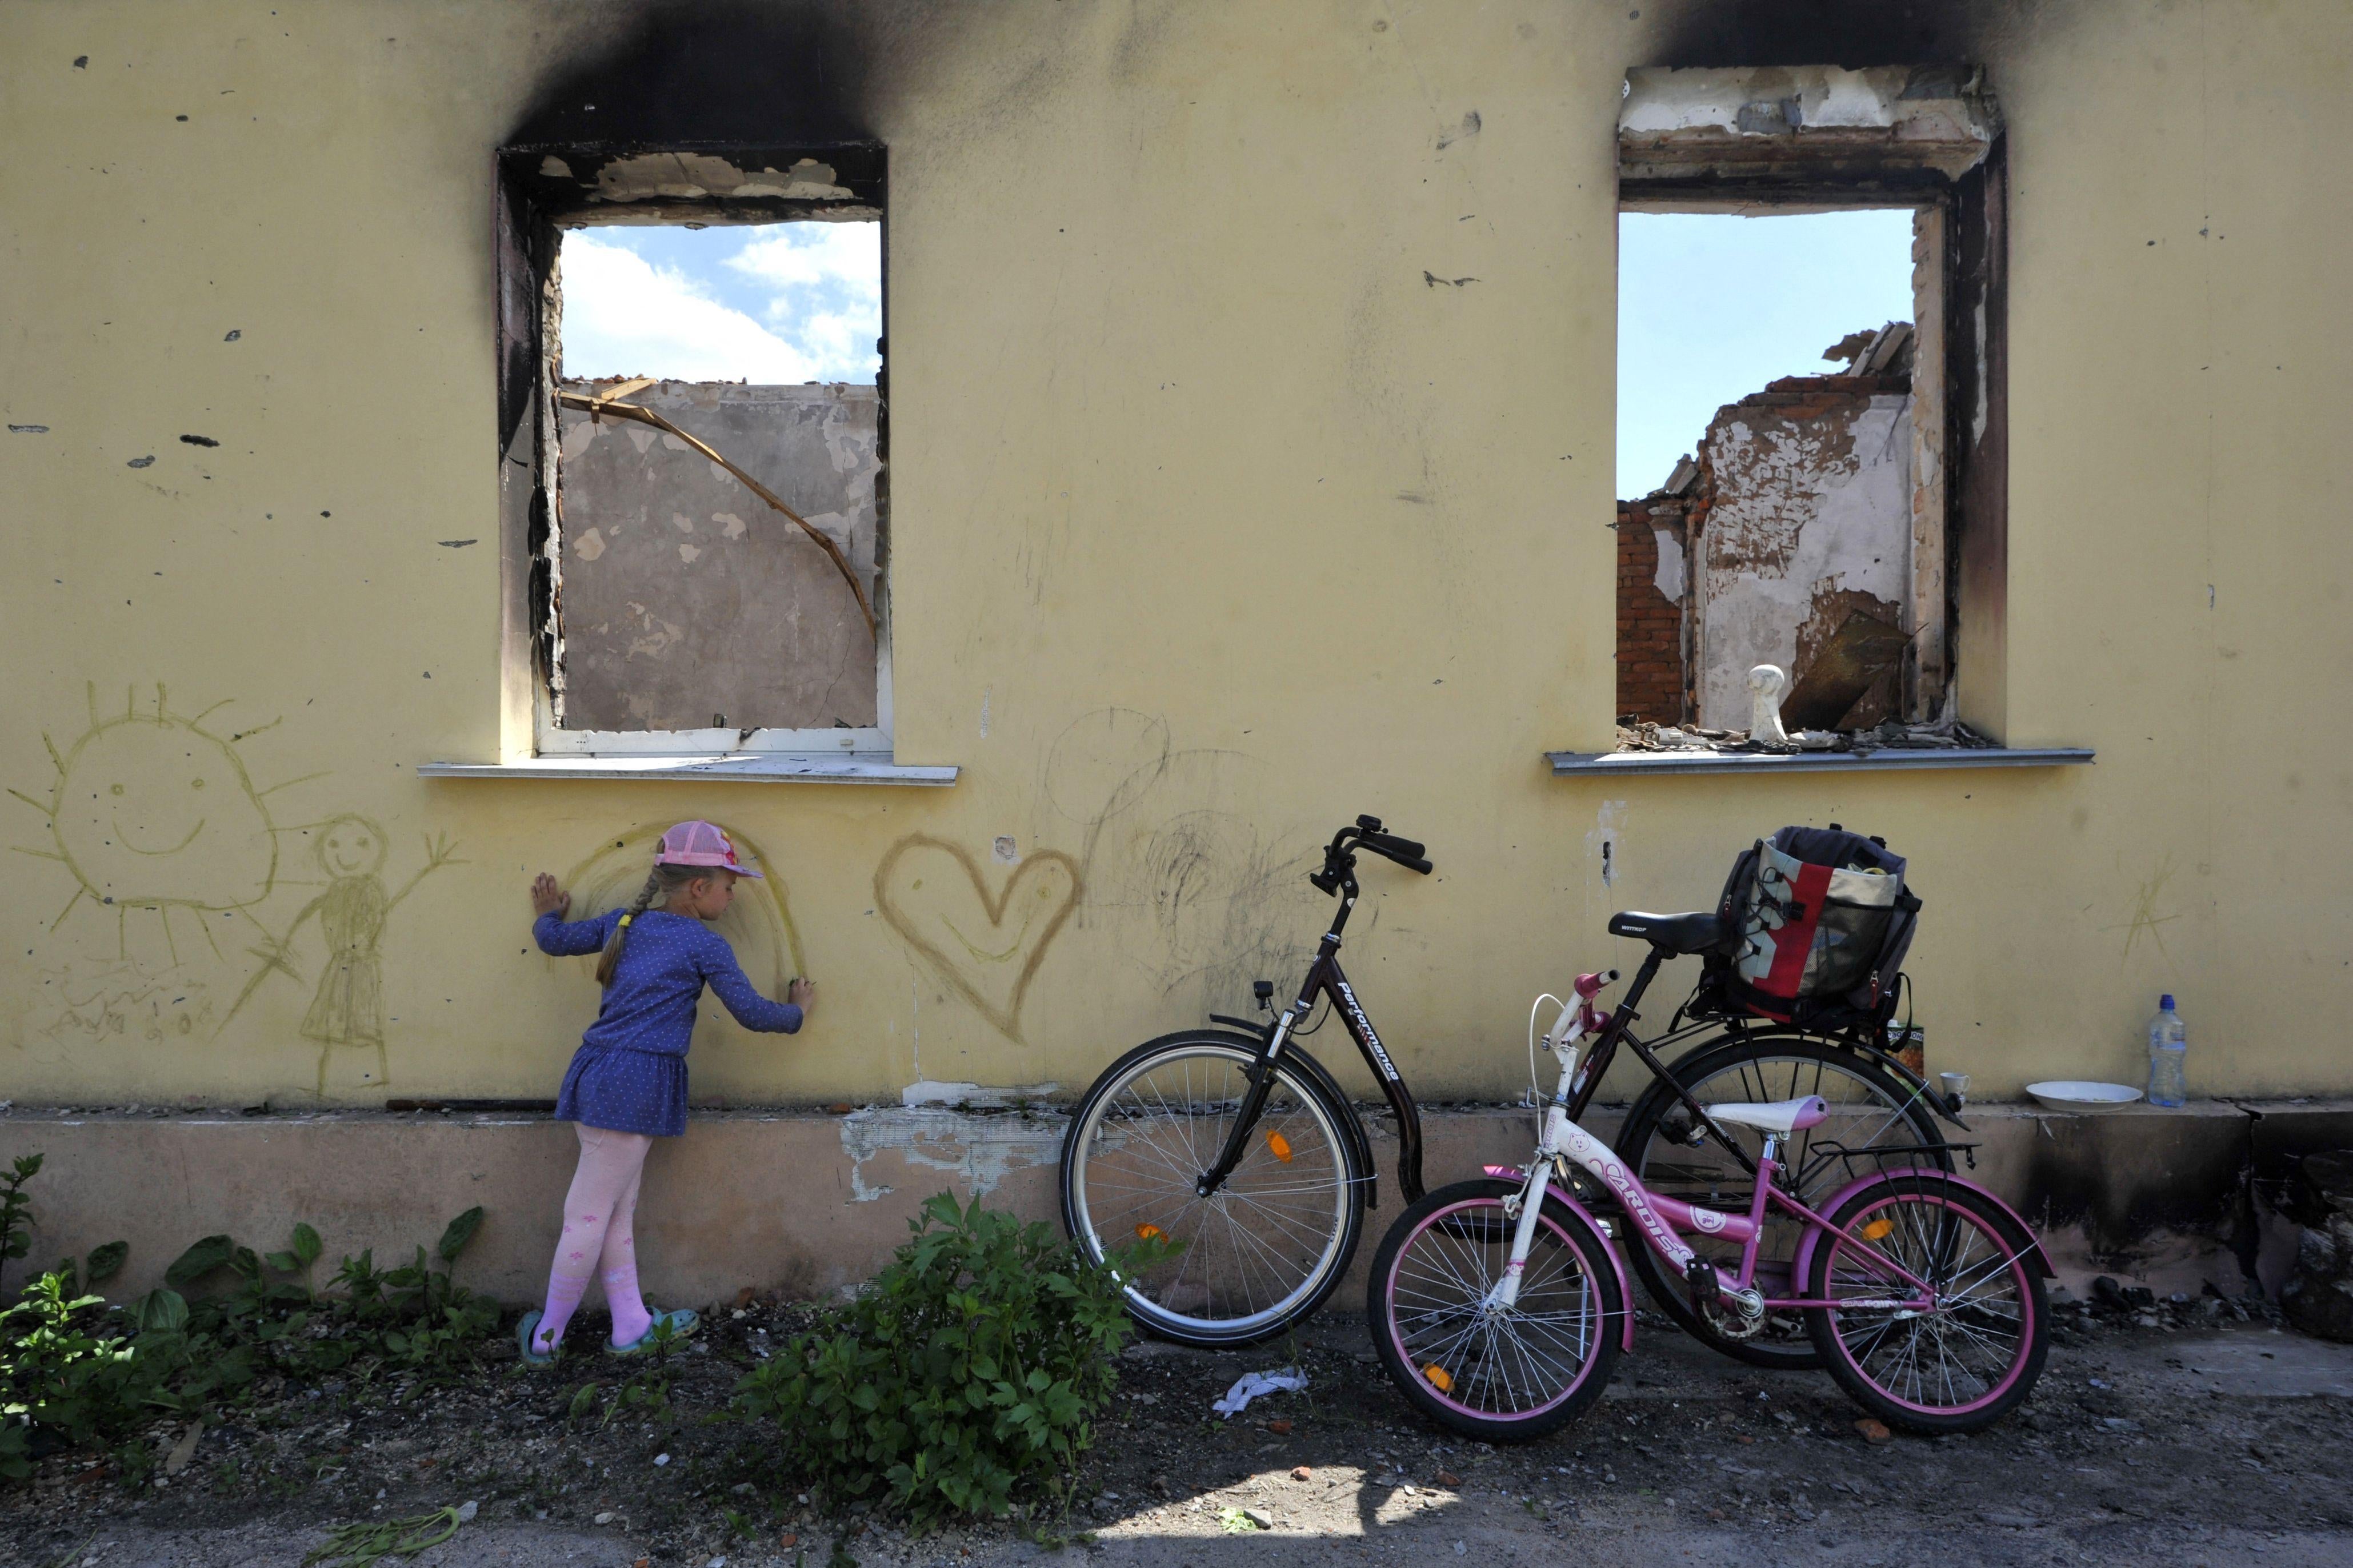 A young girl draws on the wall of a destroyed house with bicycles nearby